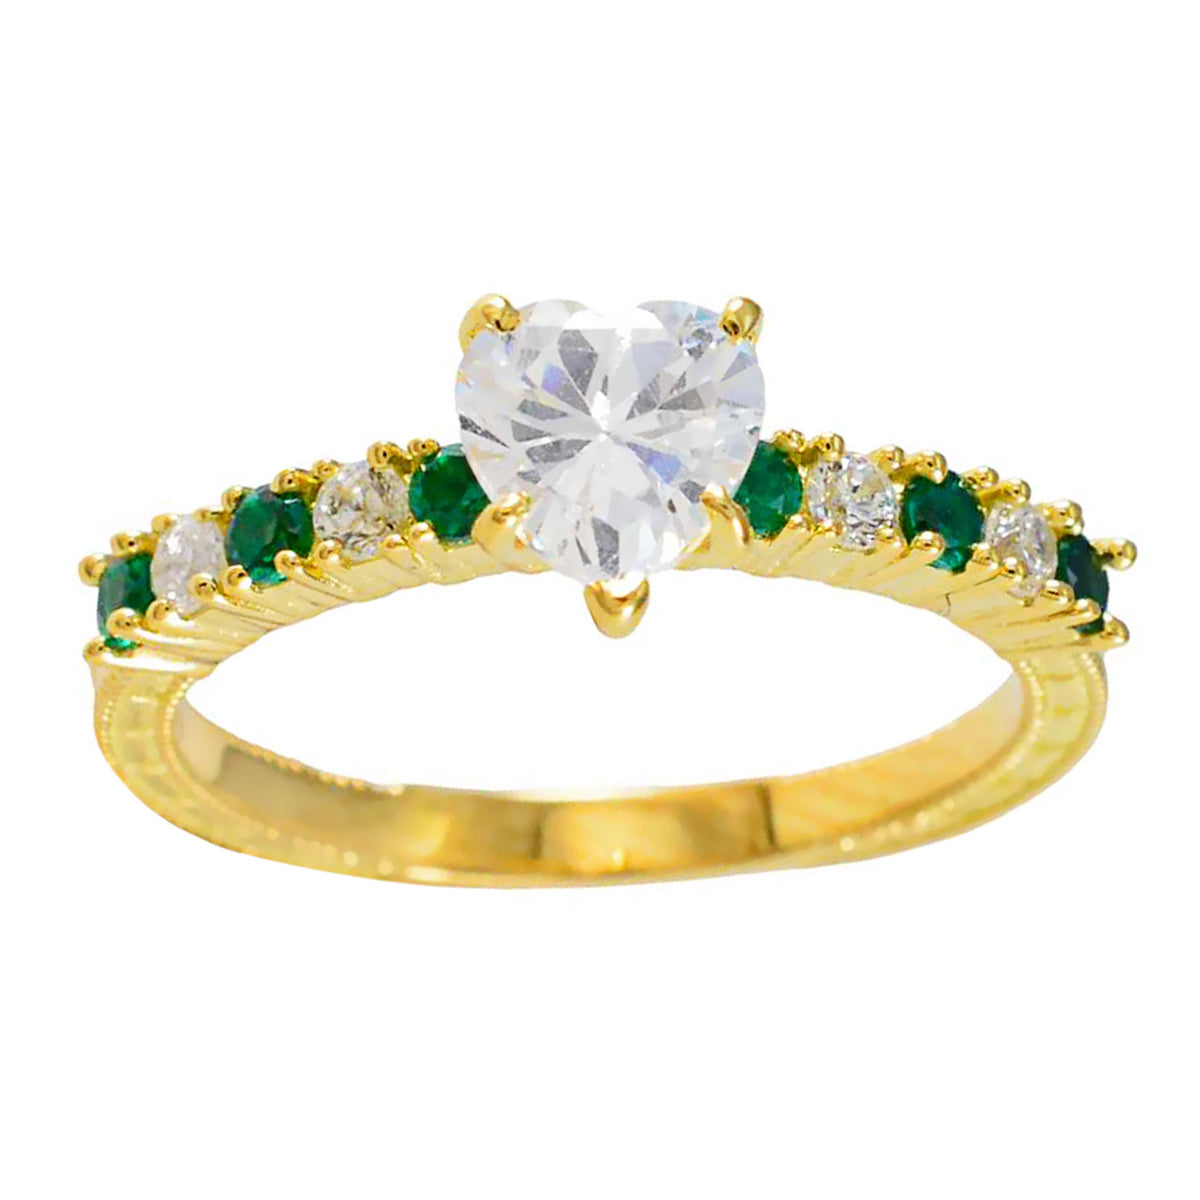 Riyo Complete Silver Ring With Yellow Gold Plating Emerald CZ Stone Heart Shape Prong Setting Antique Jewelry Fathers Day Ring